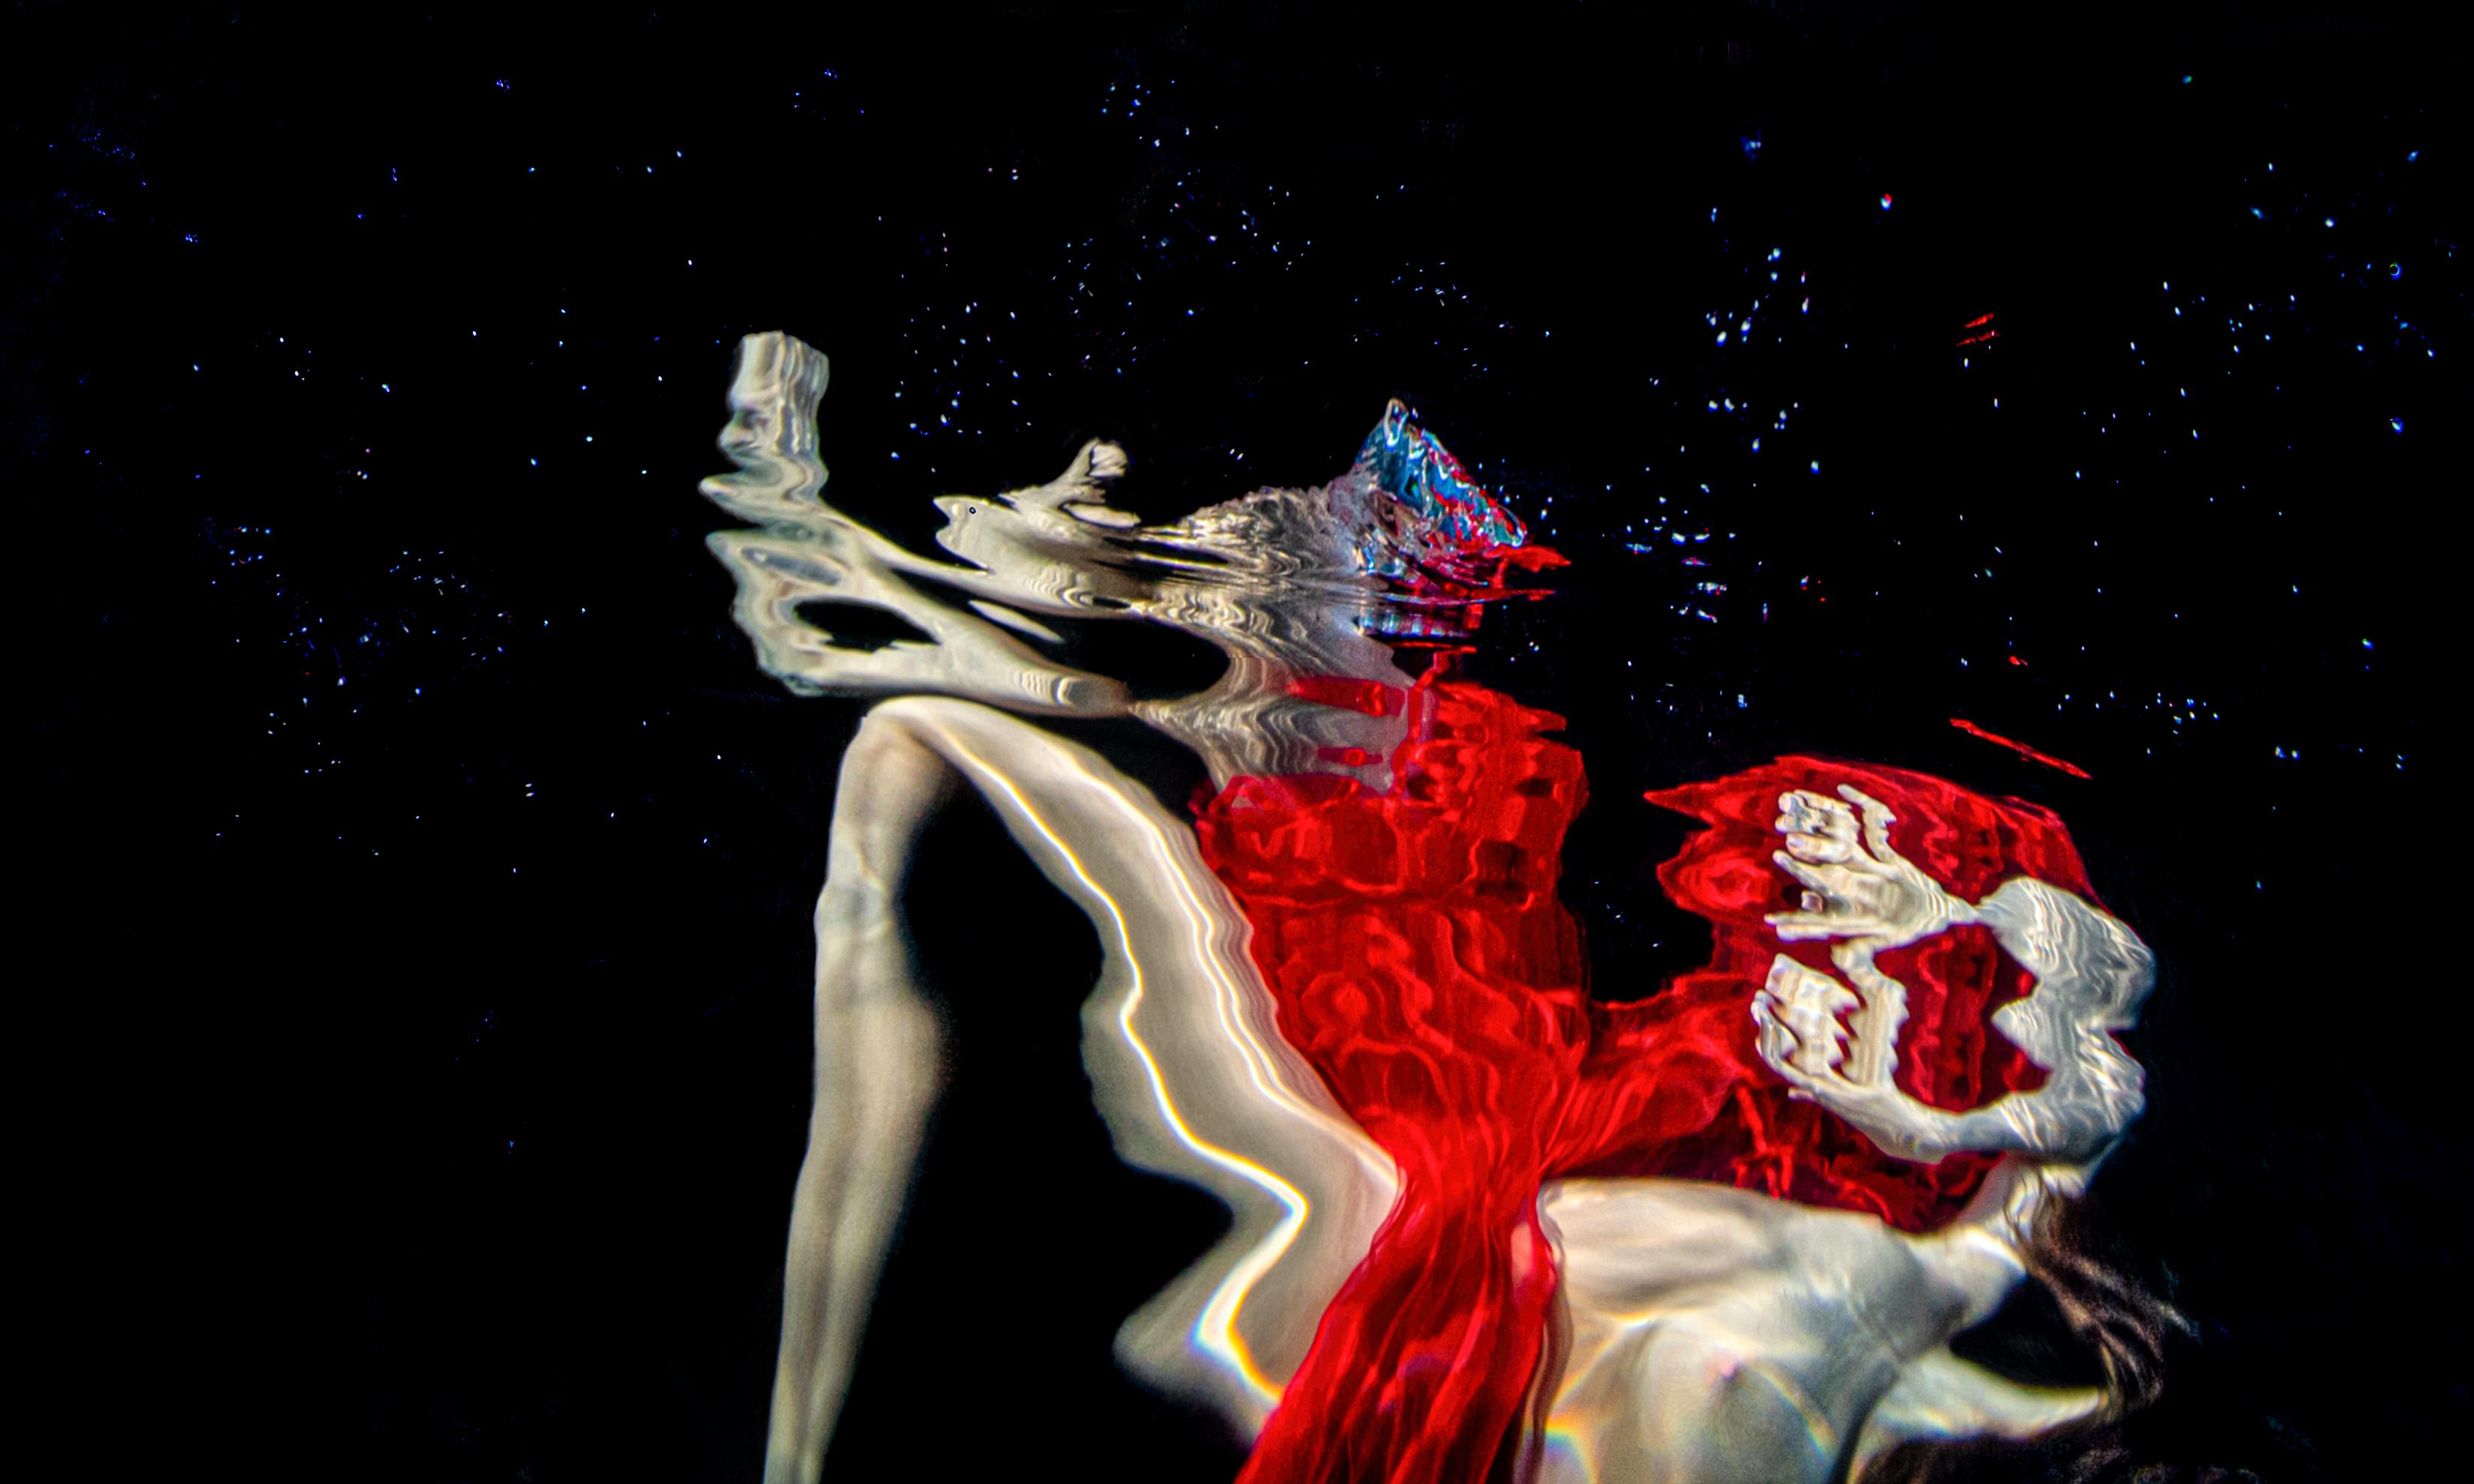 Alex Sher Color Photograph - Her Own Universe - underwater nude photo from series REFLECTIONS acrylic 29x48"